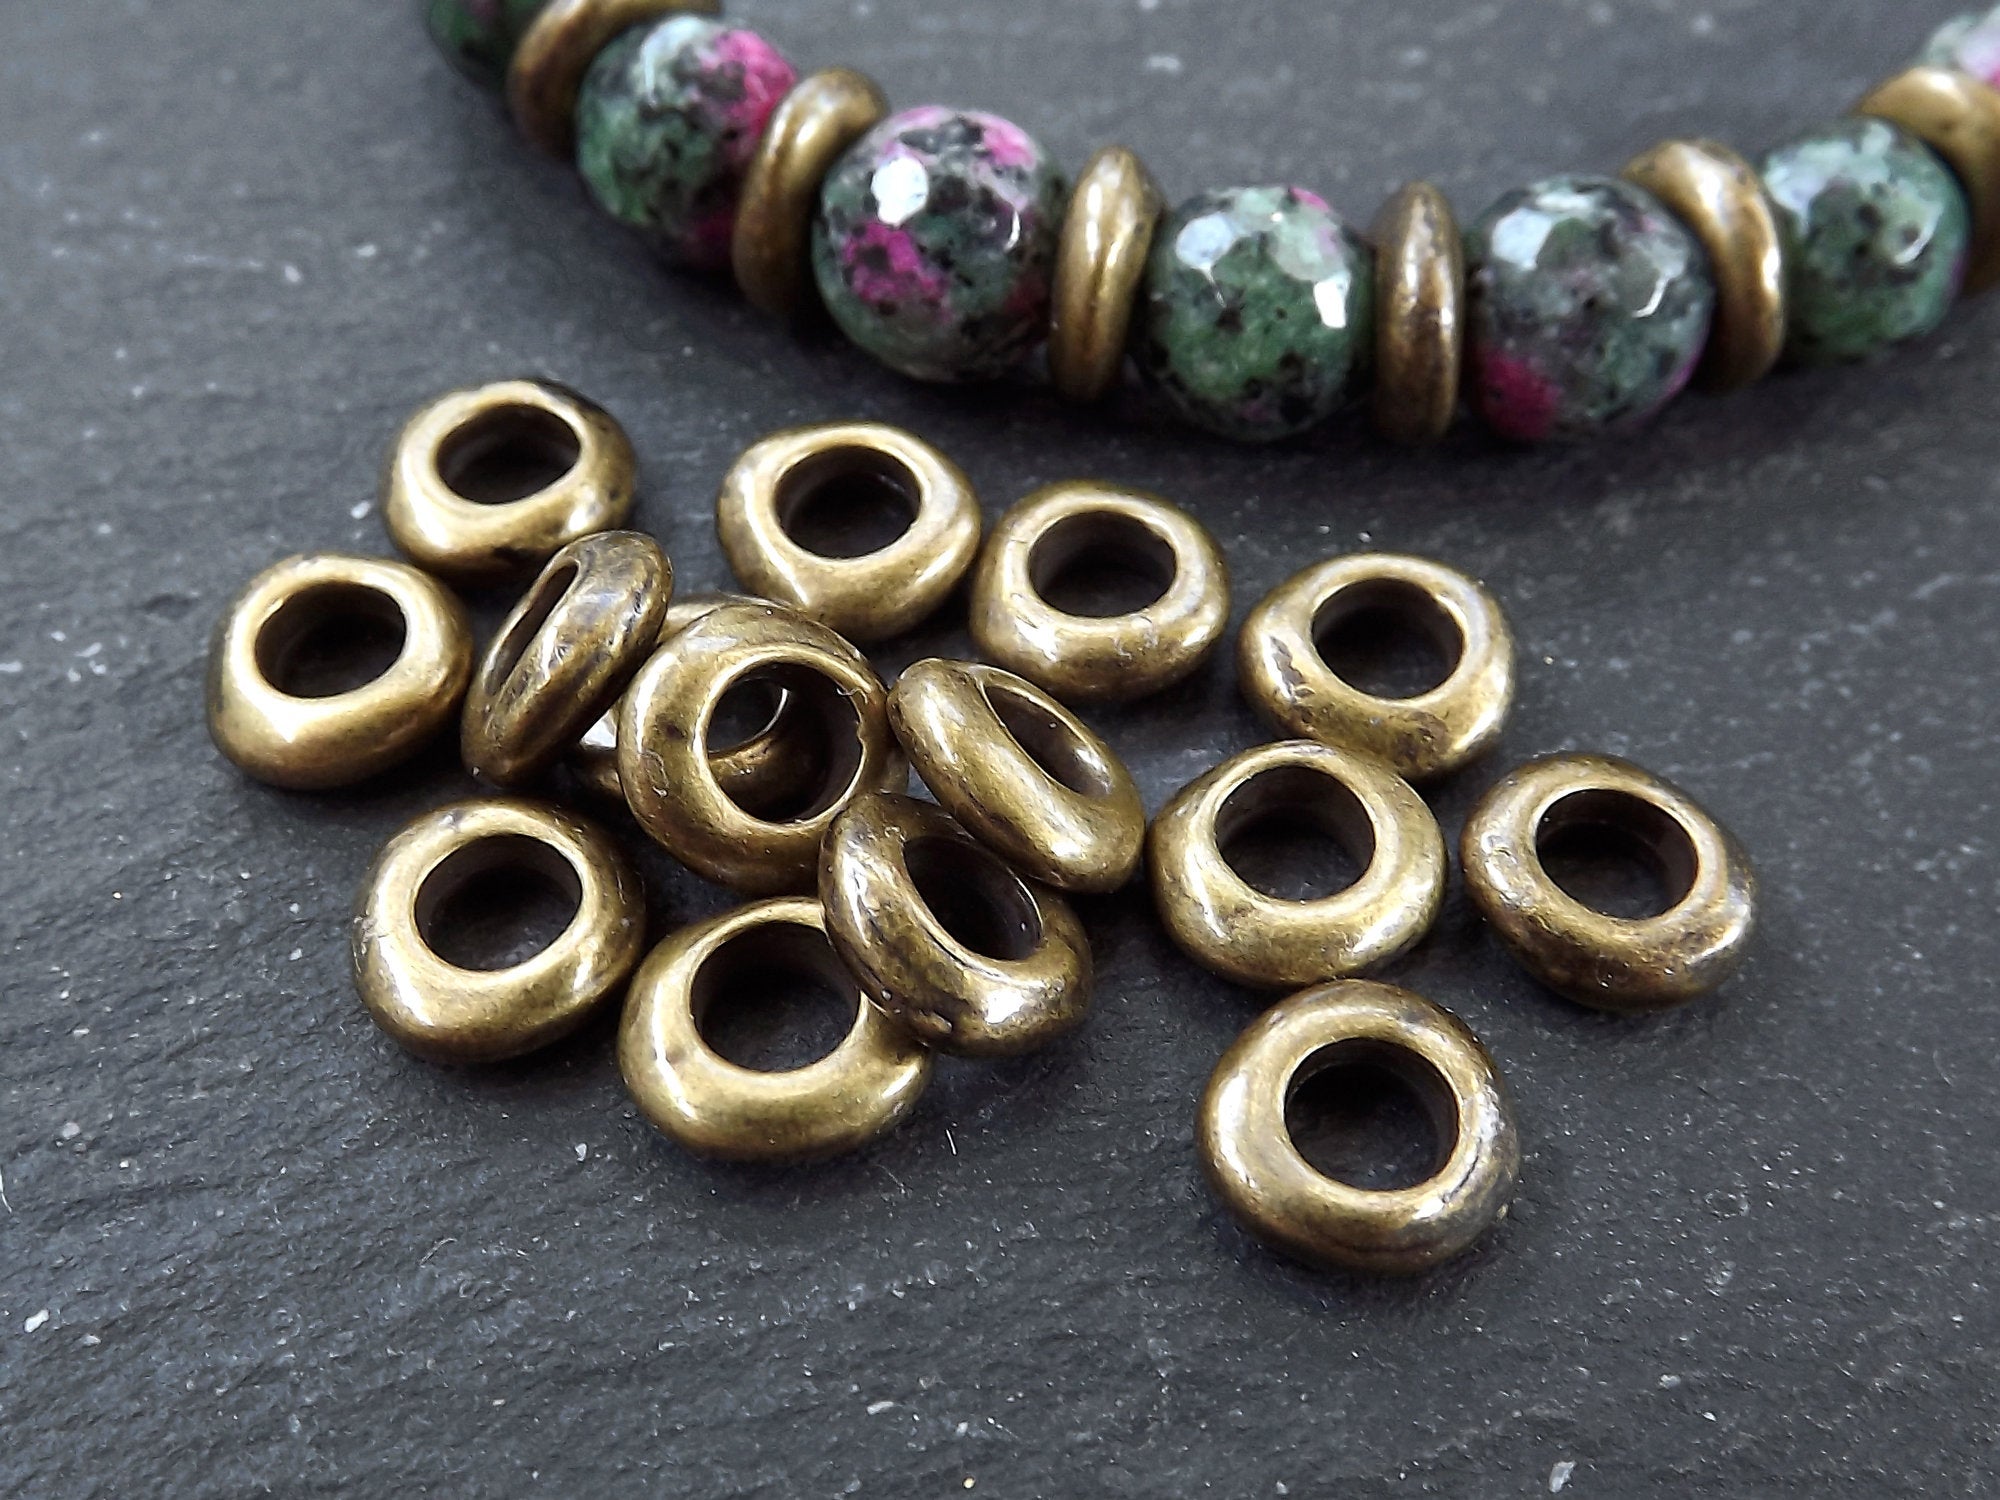 Small Bronze Washer Bead Spacers, Mykonos Greek Beads, Organic Round Metal  Beads, Jewelry Making Supply, Antique Bronze Plated, 20 pc